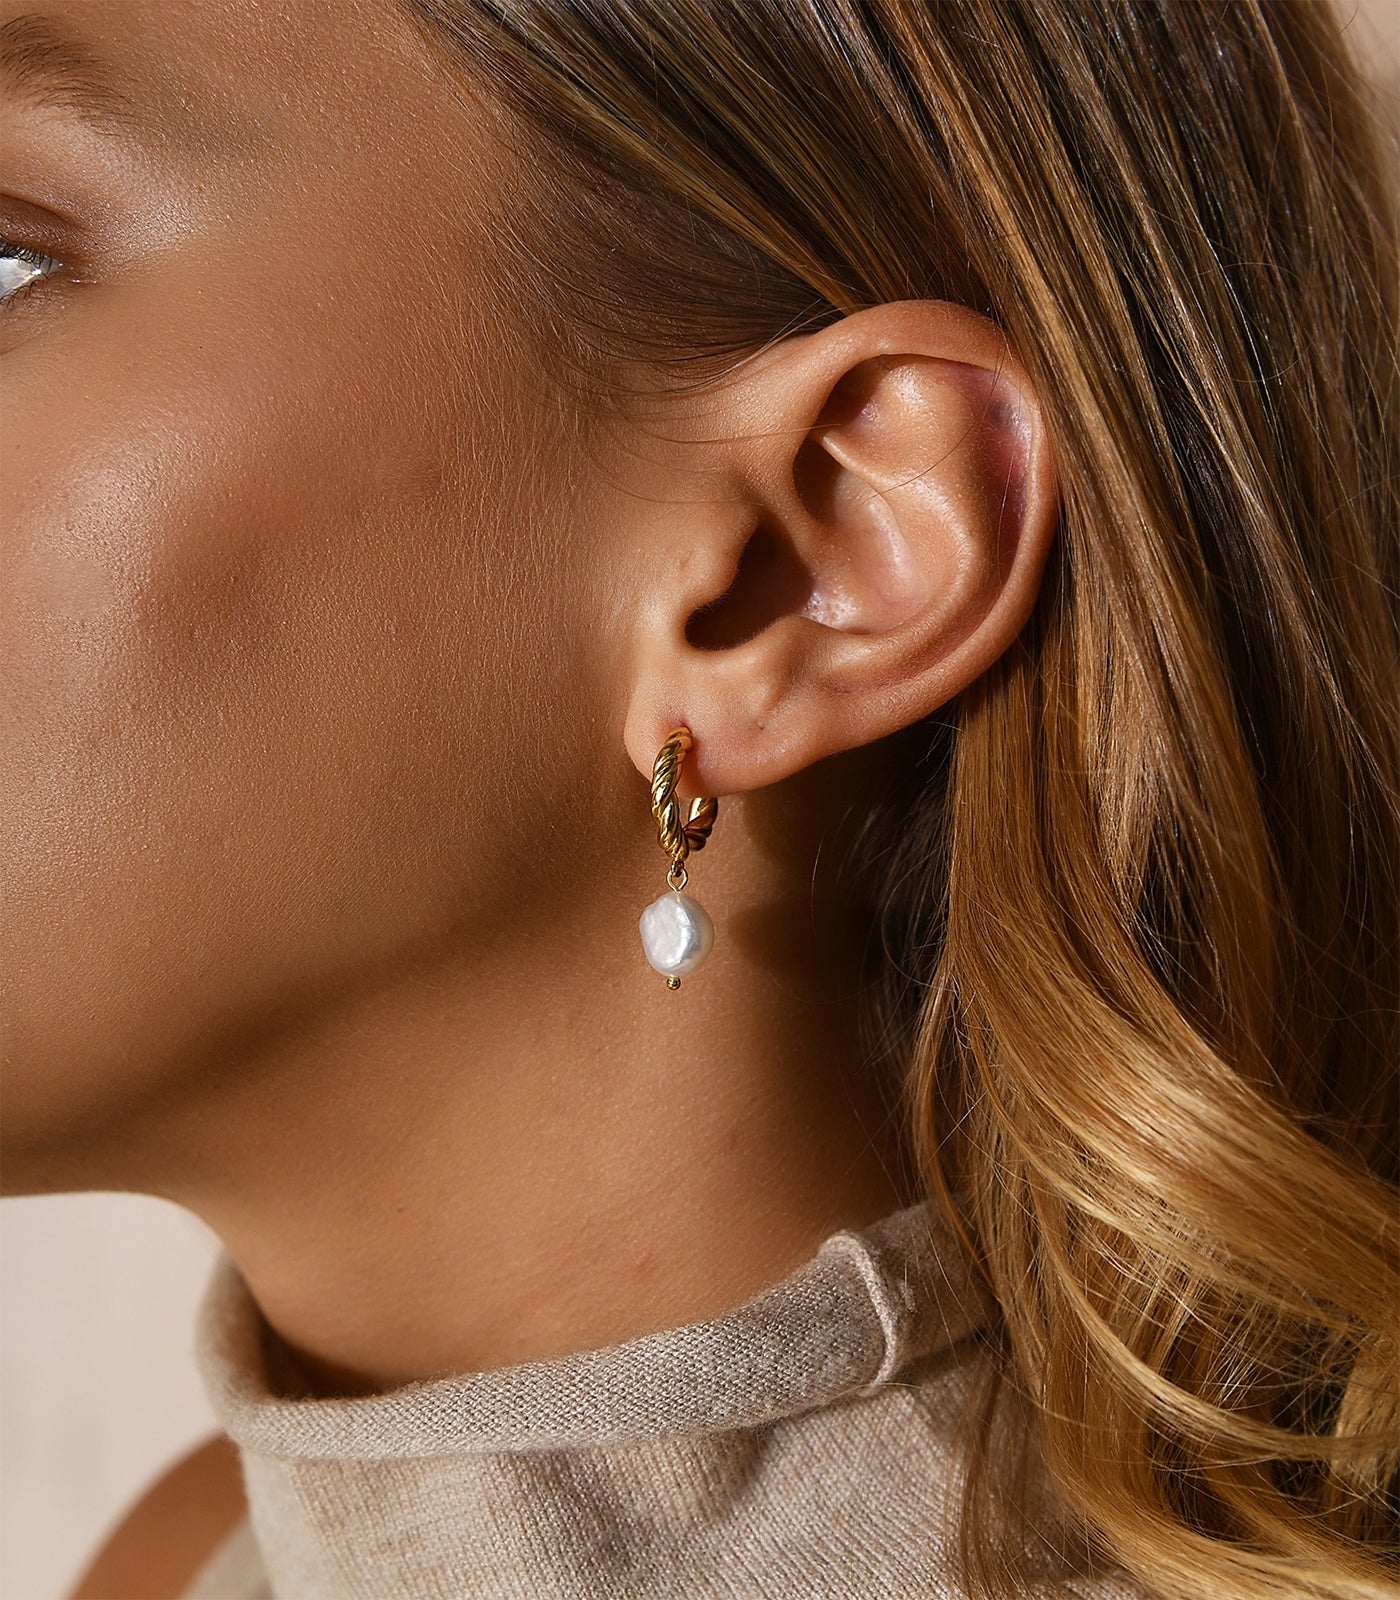 A gold vermeil small twisting hoop earring with a baroque pearl hanging from the hoop.